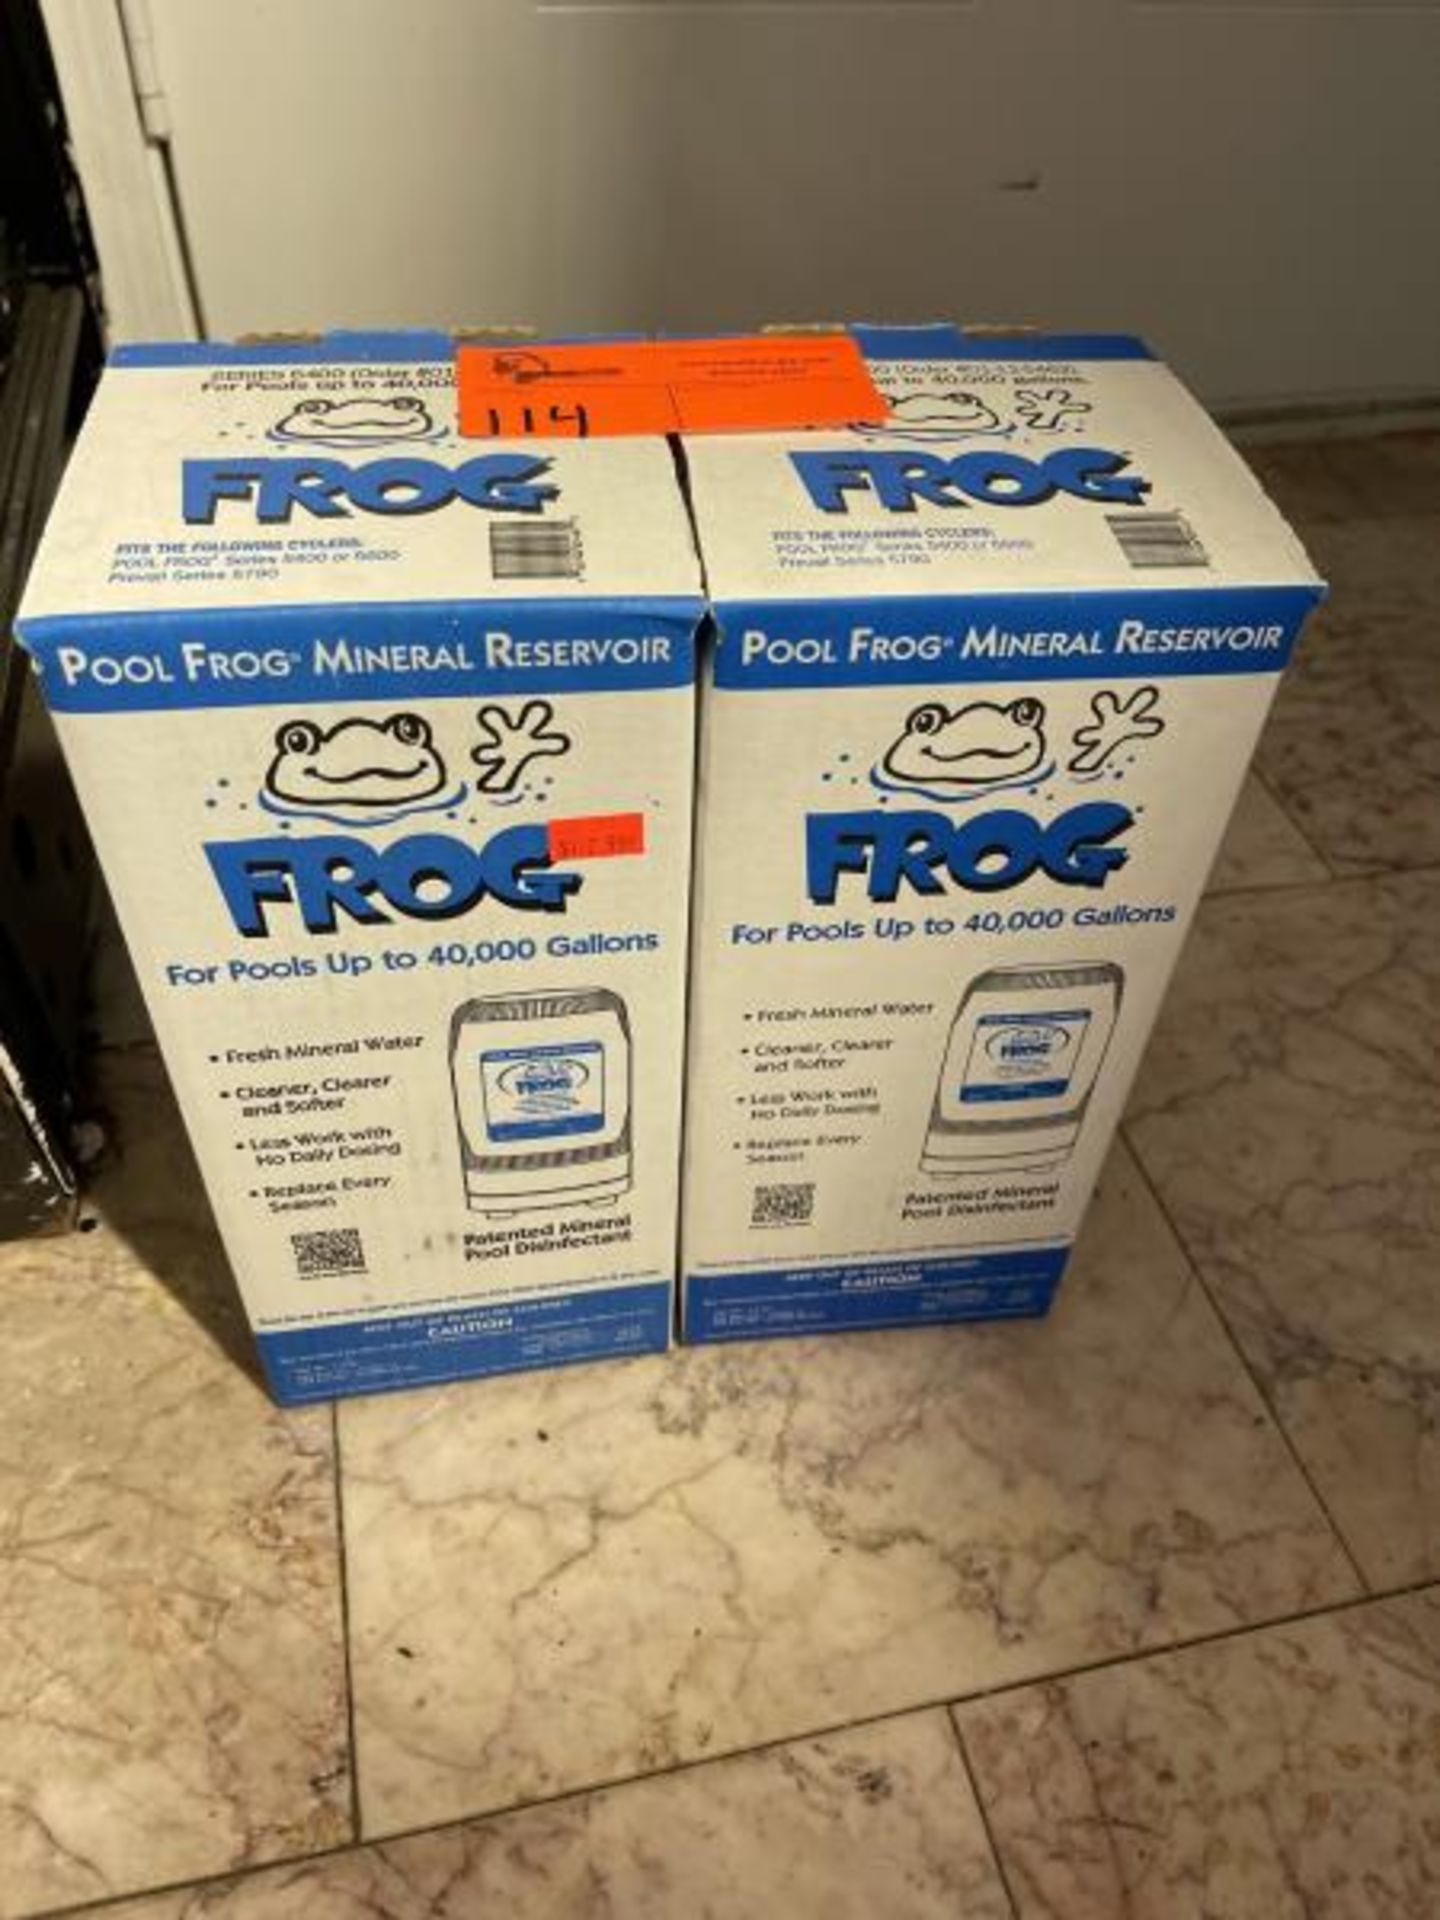 Lot of (2) Pool Frog mineral reservoir refills for pools up to 40,000 gallons, series 5400